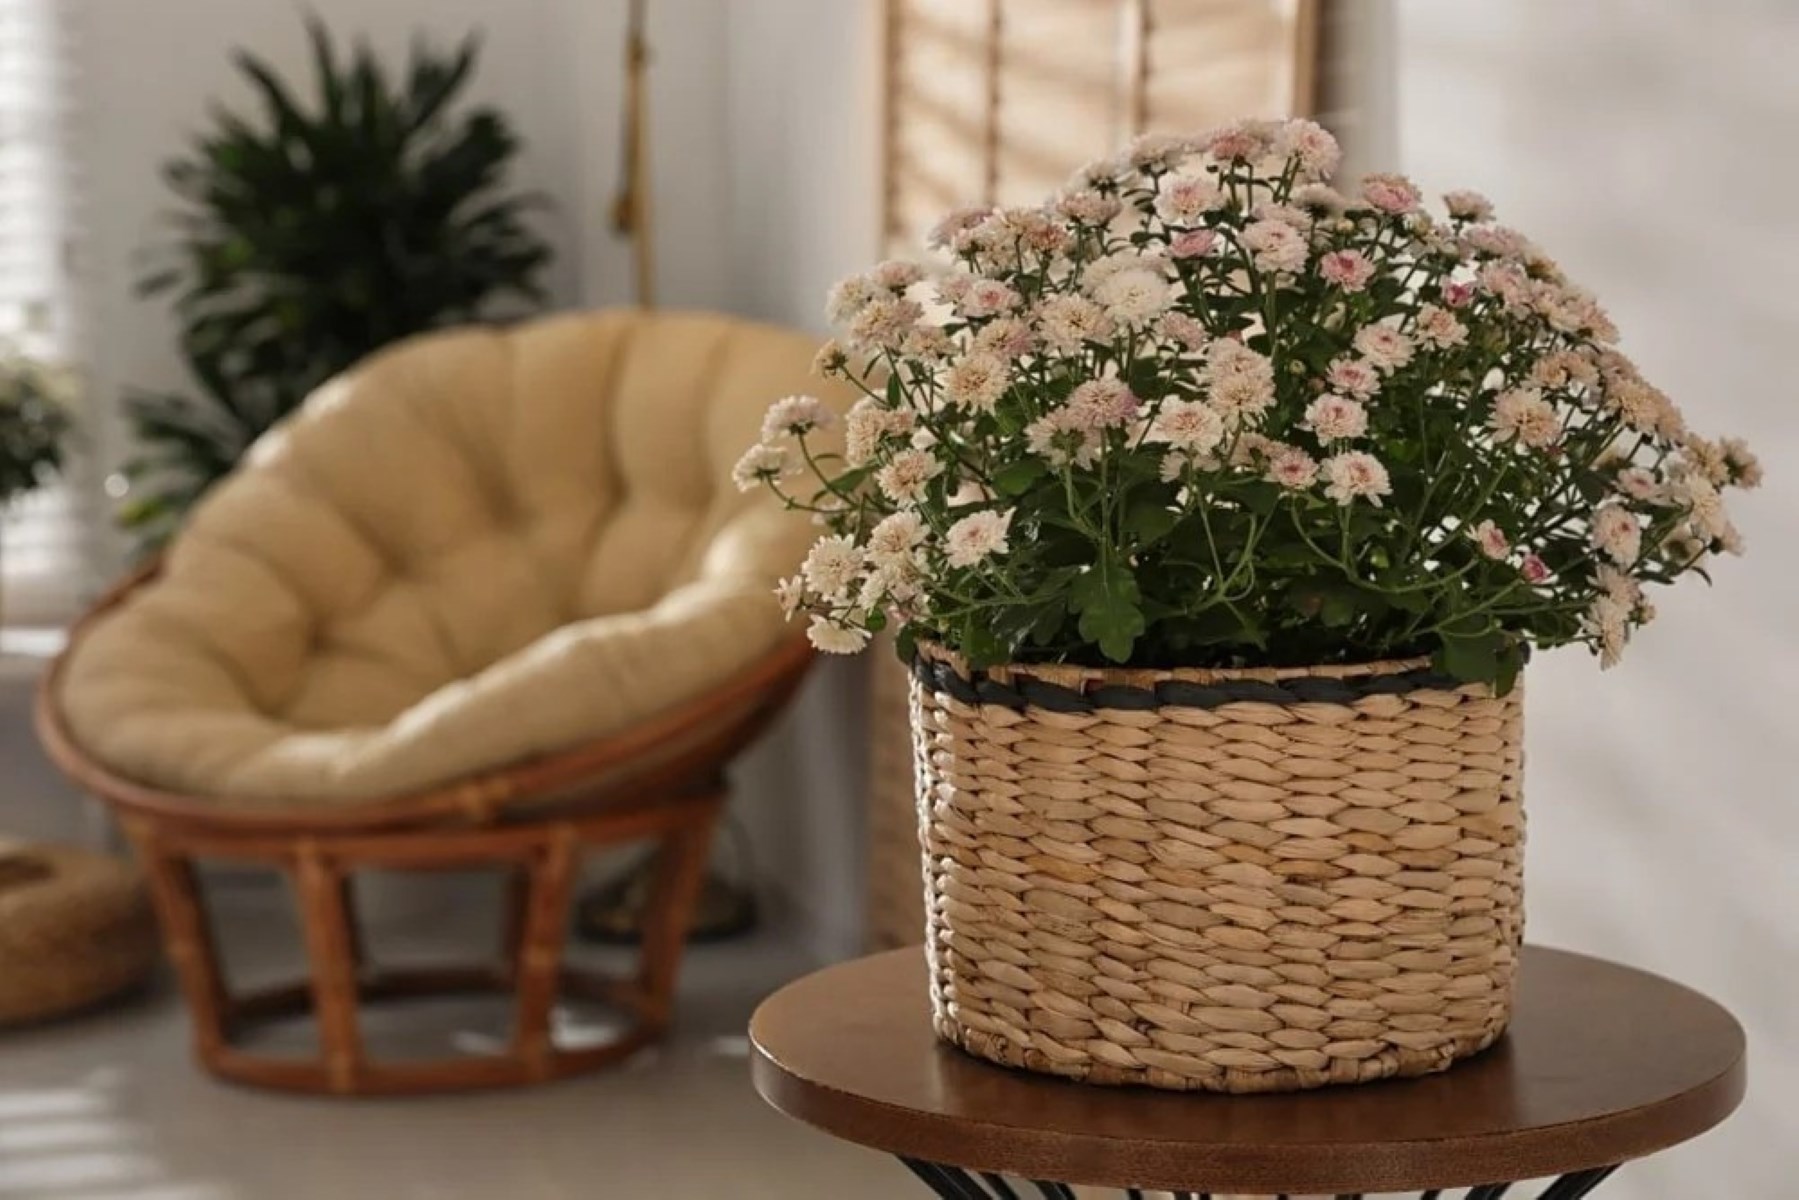 How To Care For Mums Indoors